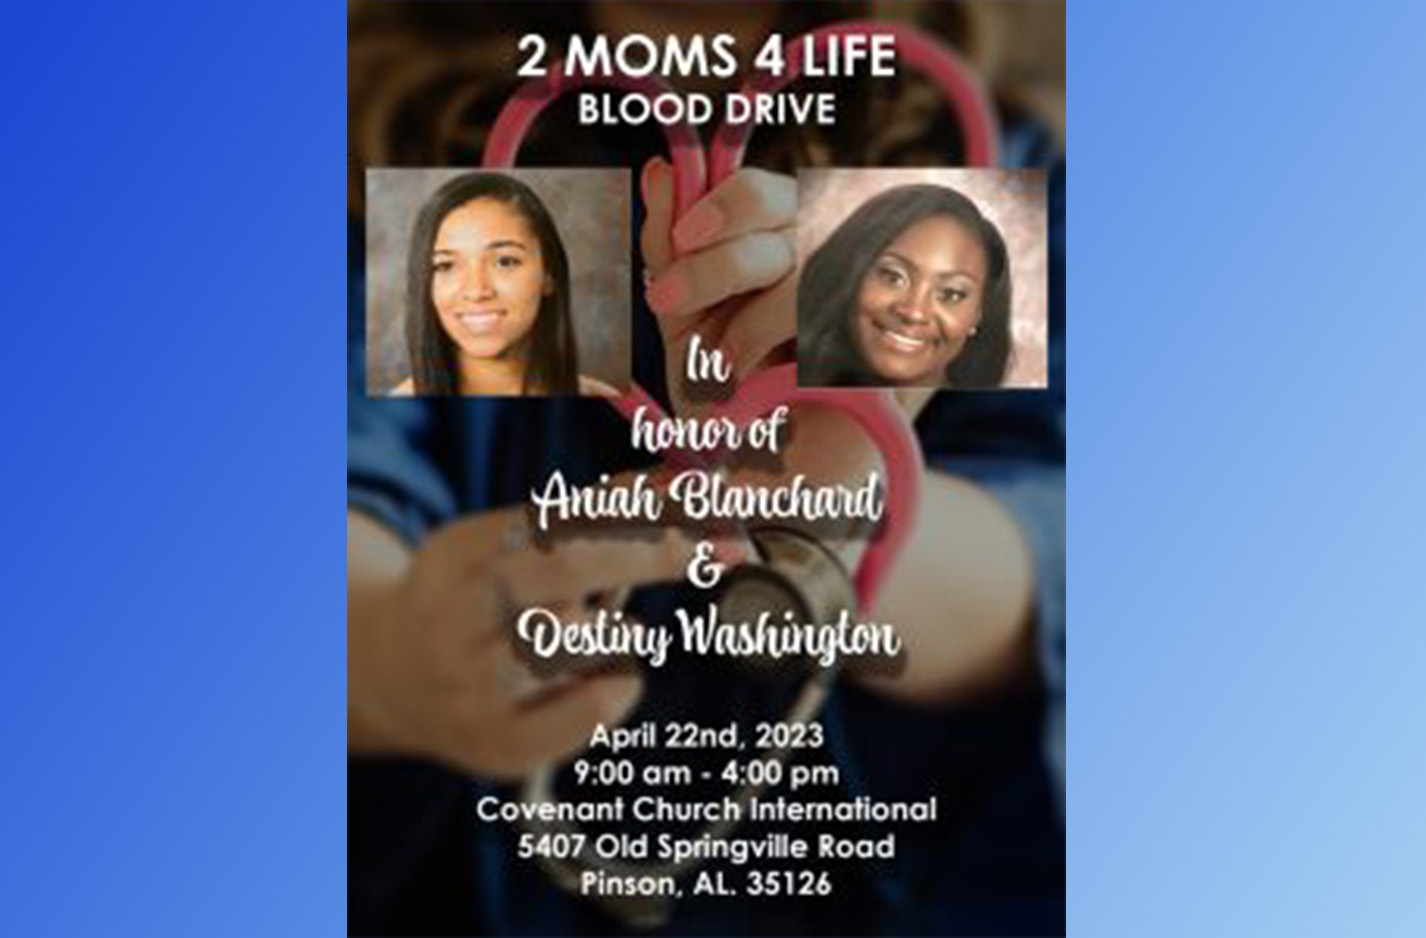 ‘2 Moms 4 Life Blood Drive’ to be held Saturday in honor of Aniah Blanchard, Destiny Washington